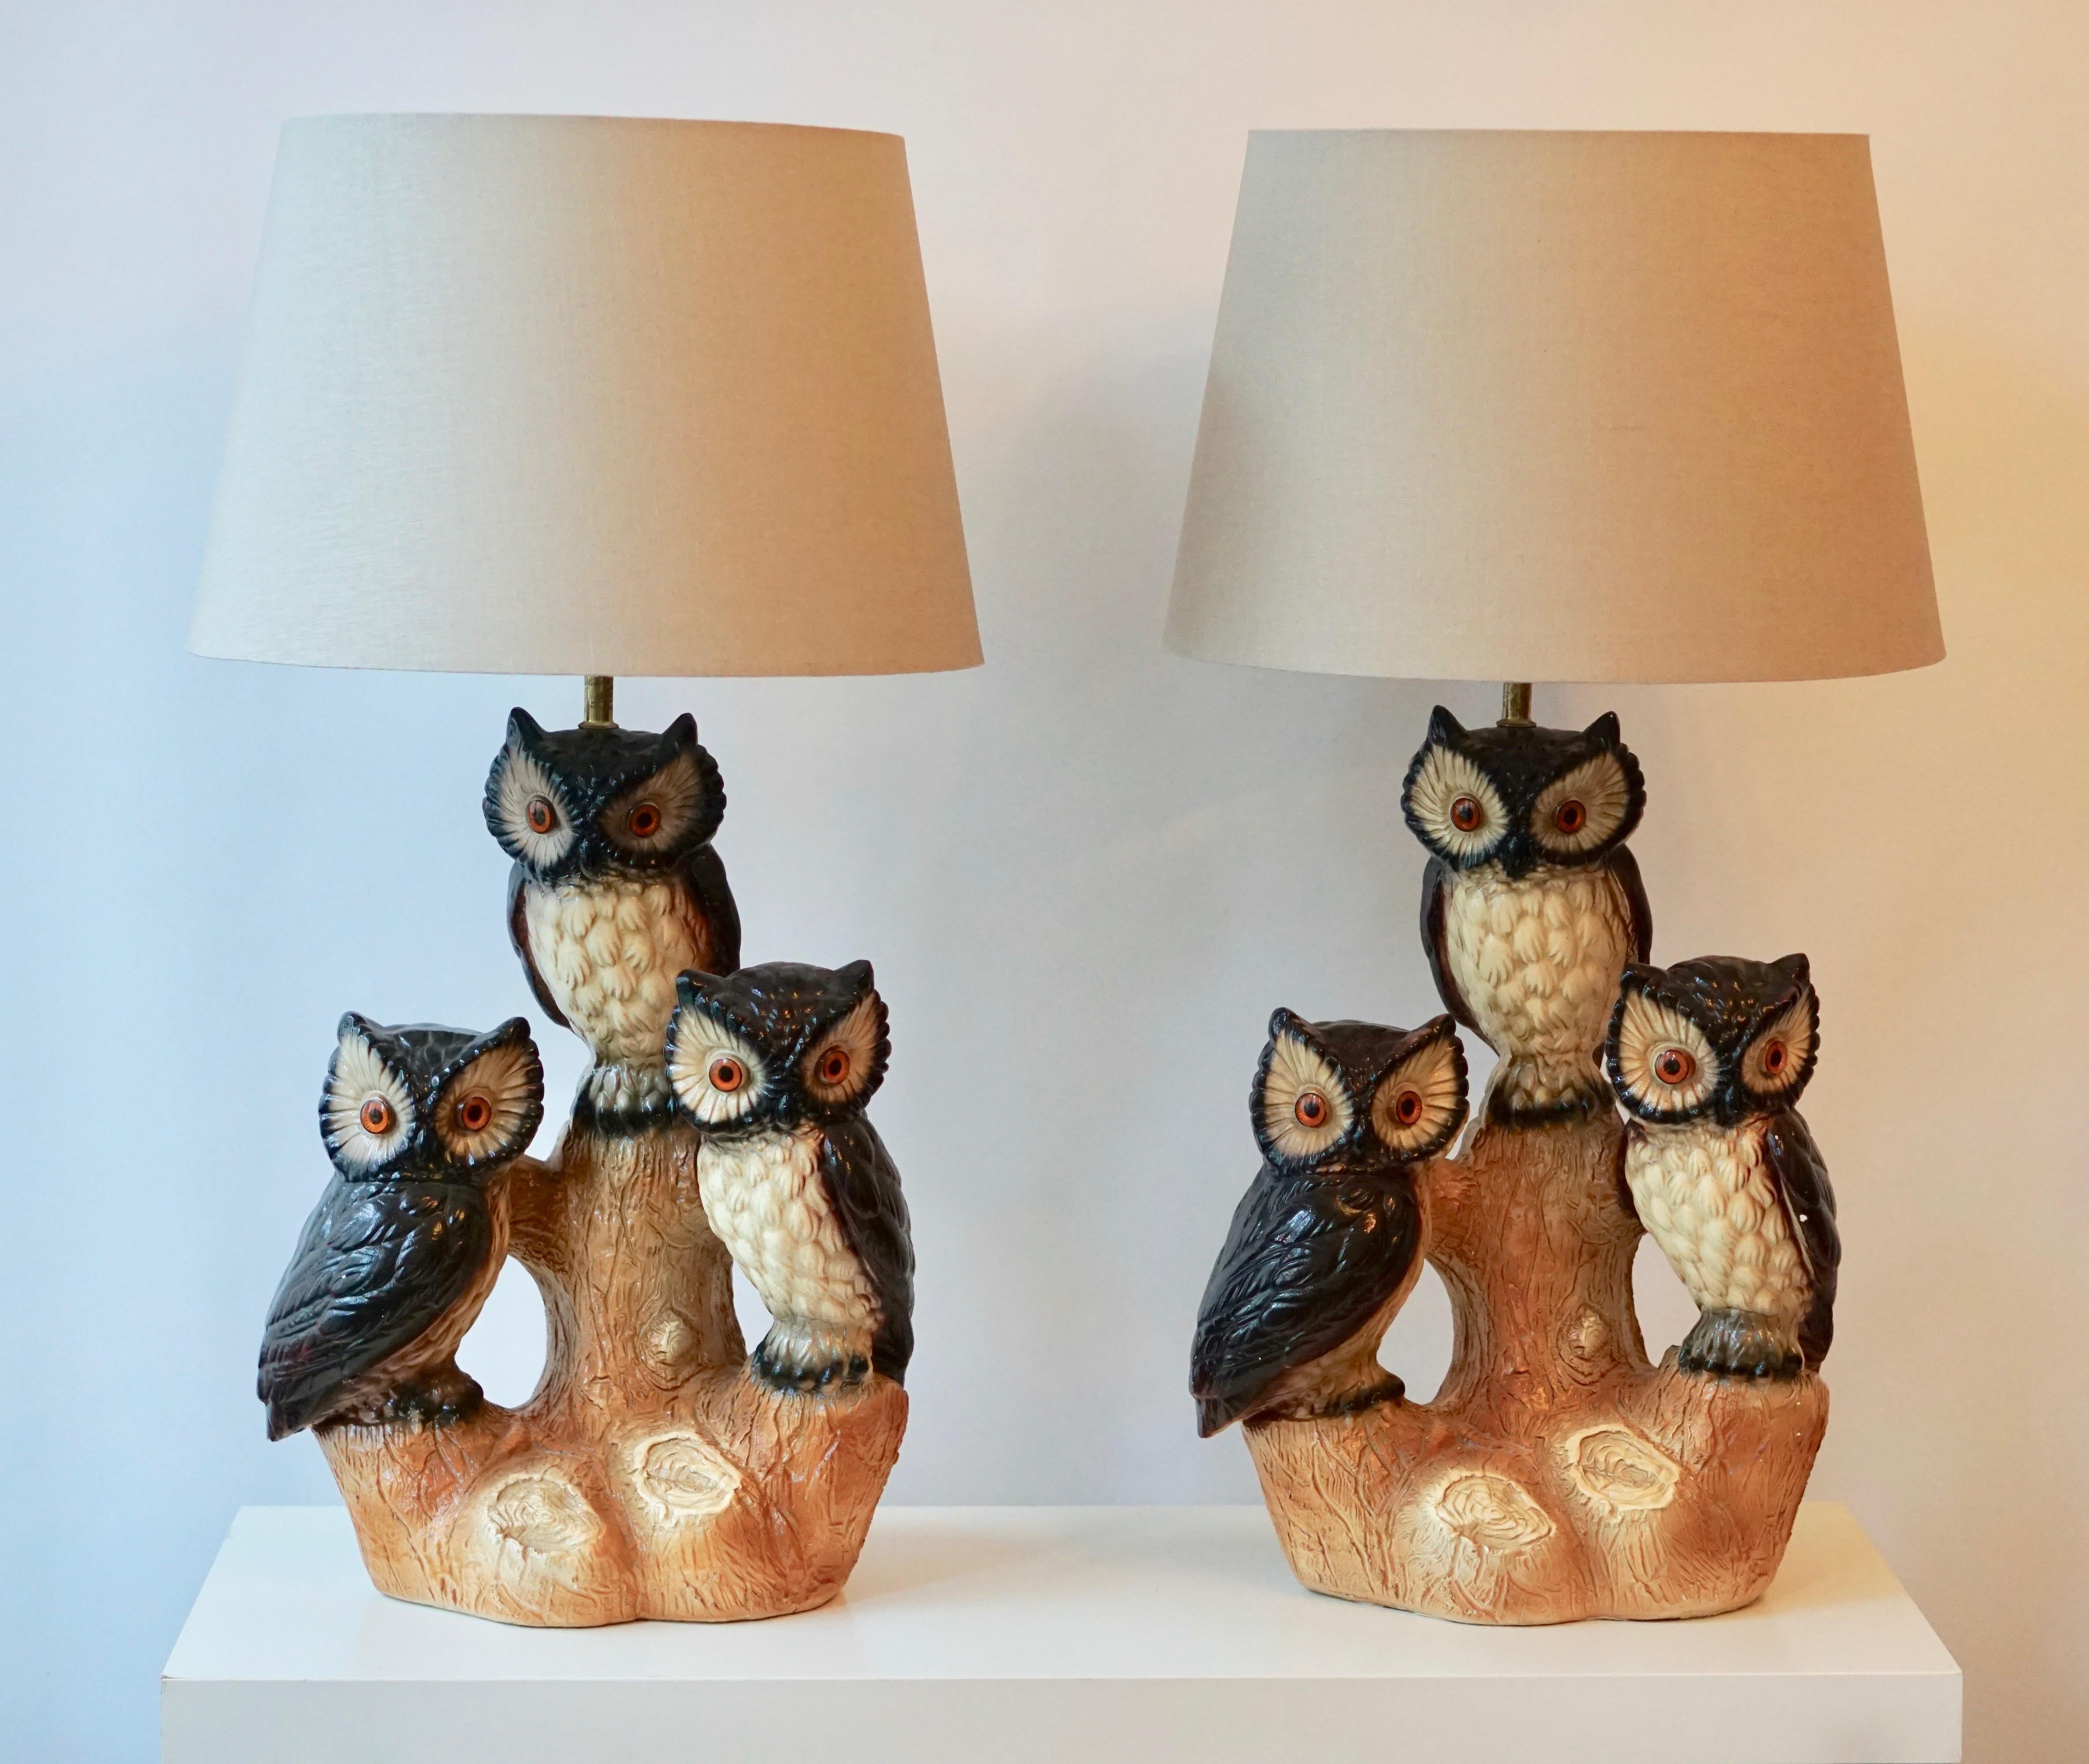 Two ceramic owl table lamps.
Measures: Diameter 44 cm.
Height 82 cm.
Height ceramic base 50 cm. 
Total height without shade 77 cm.
One E27 bulb.
Shades shown are for demonstration purposes only.